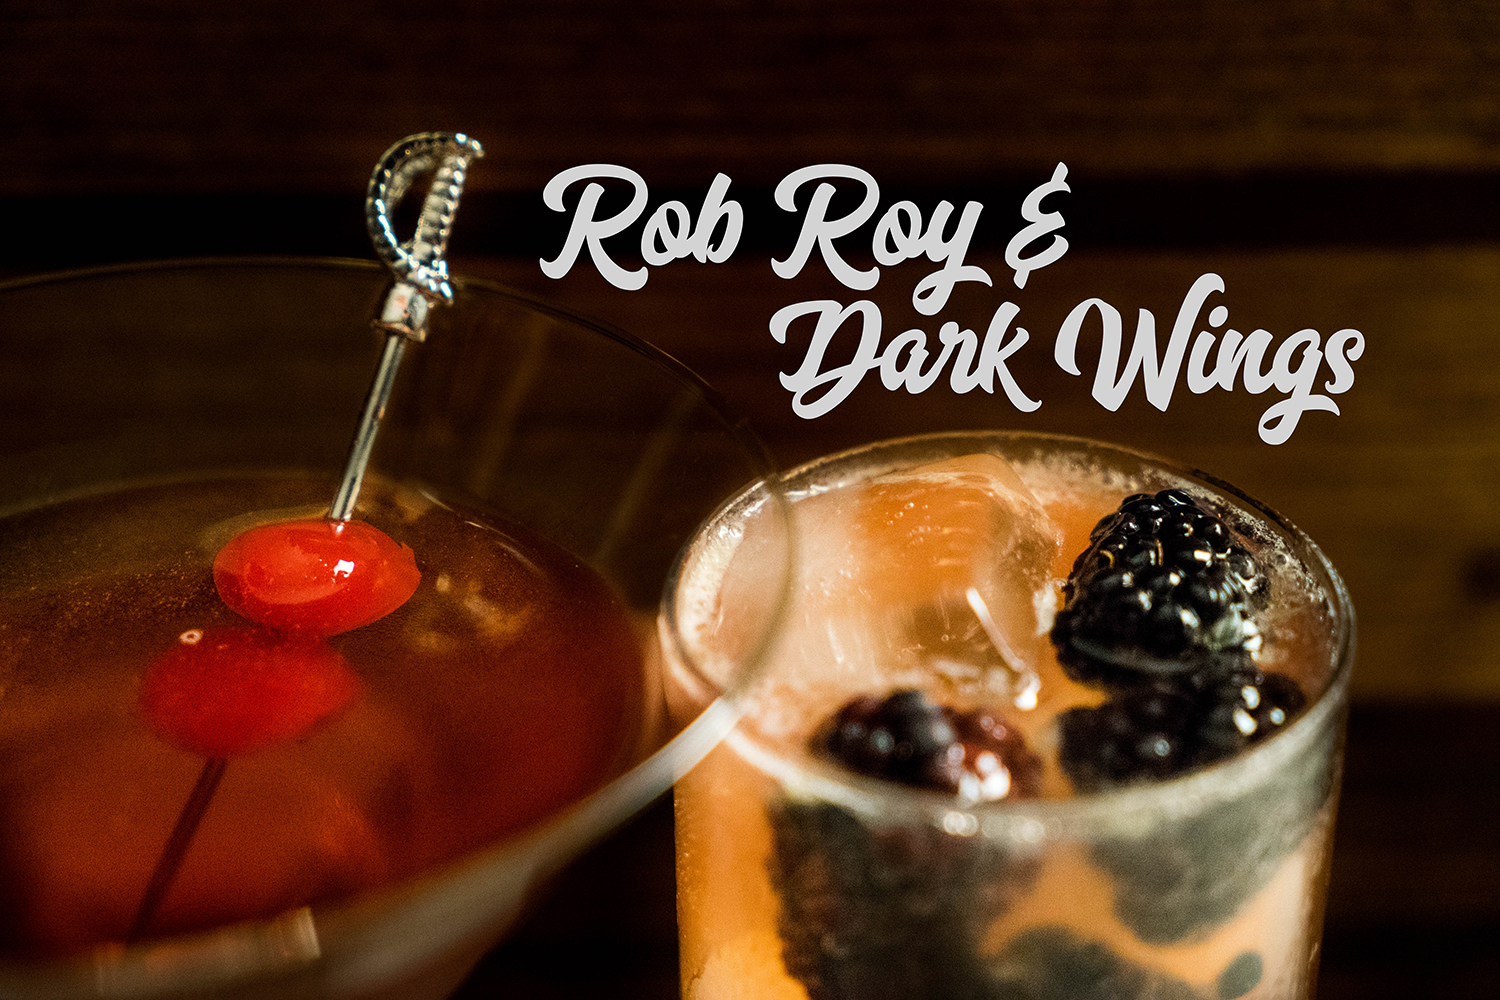 Dark Wings and Rob Roy